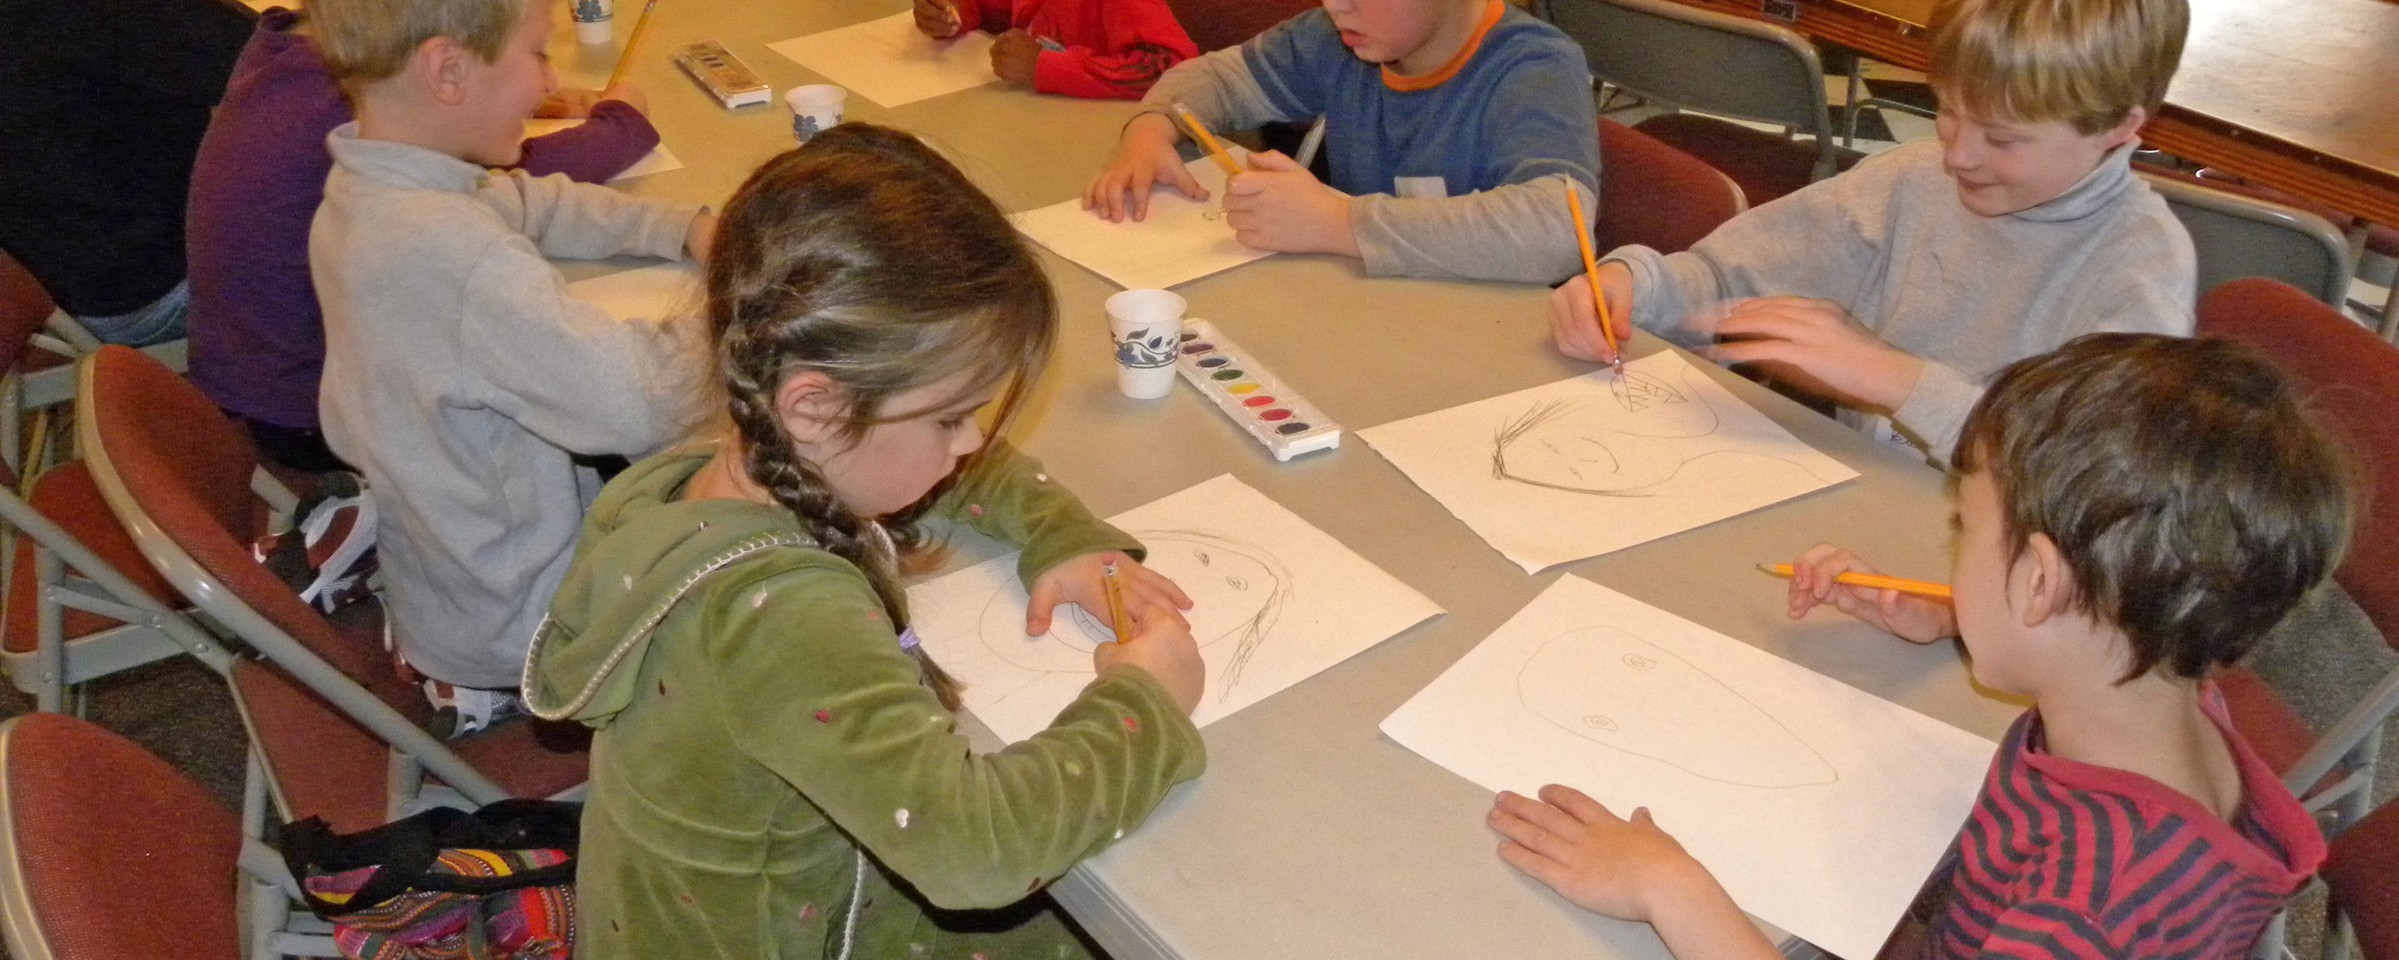 children drawing pictures at a table